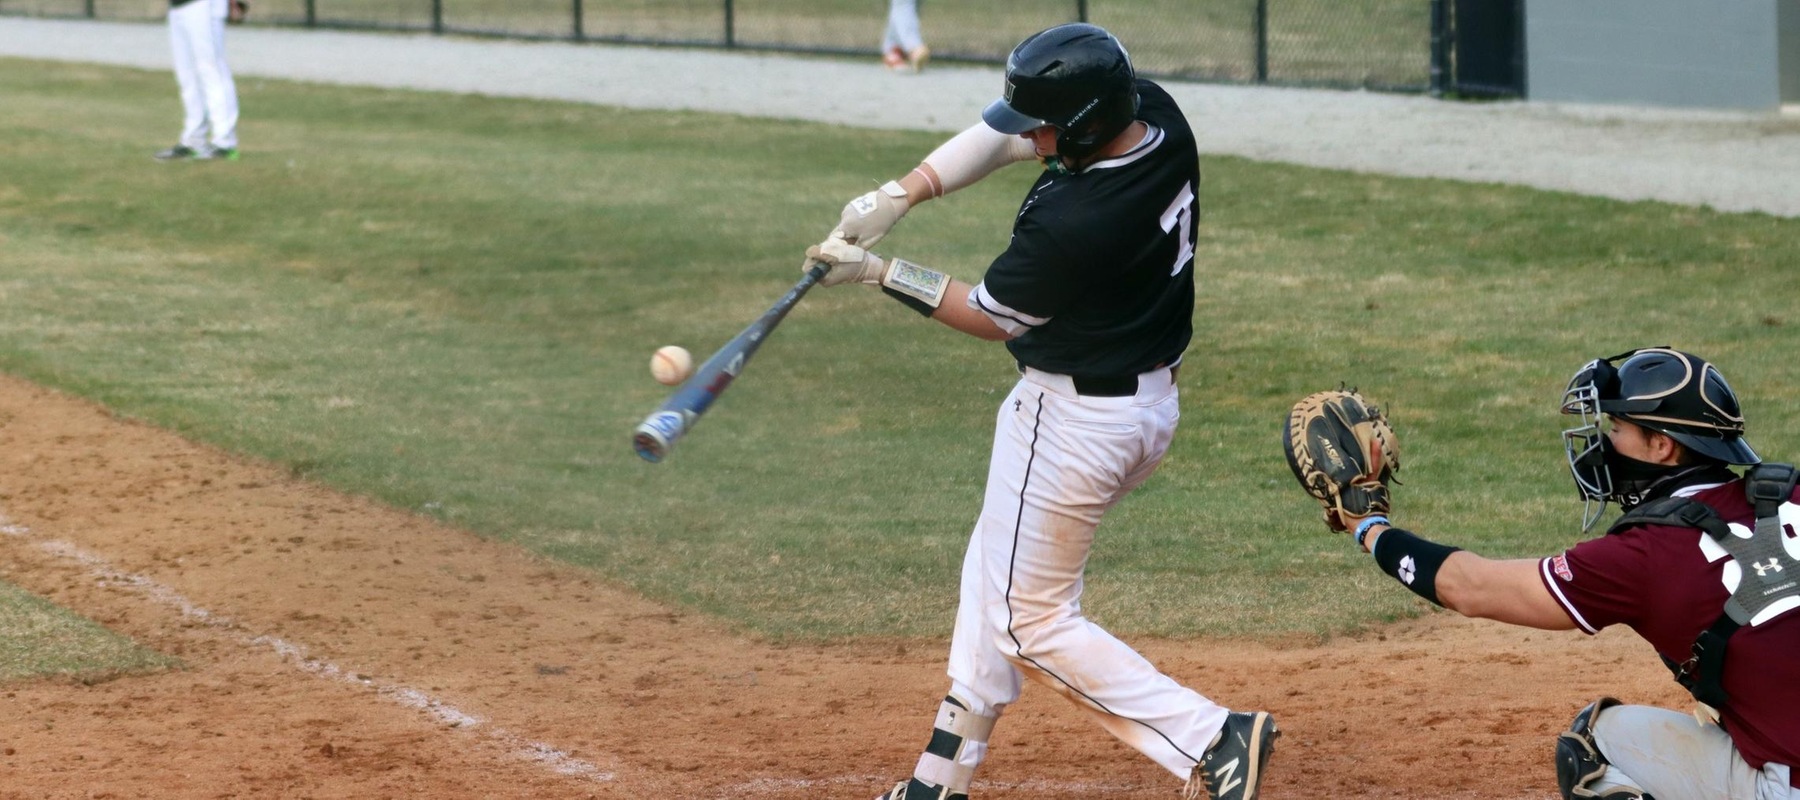 Photo of Brett Brooks who batted 2-for-4 with a double and 3 RBI. Copyright 2021; Wilmington University. All rights reserved. Photo by Erin Harvey. March 23 vs. USciences.